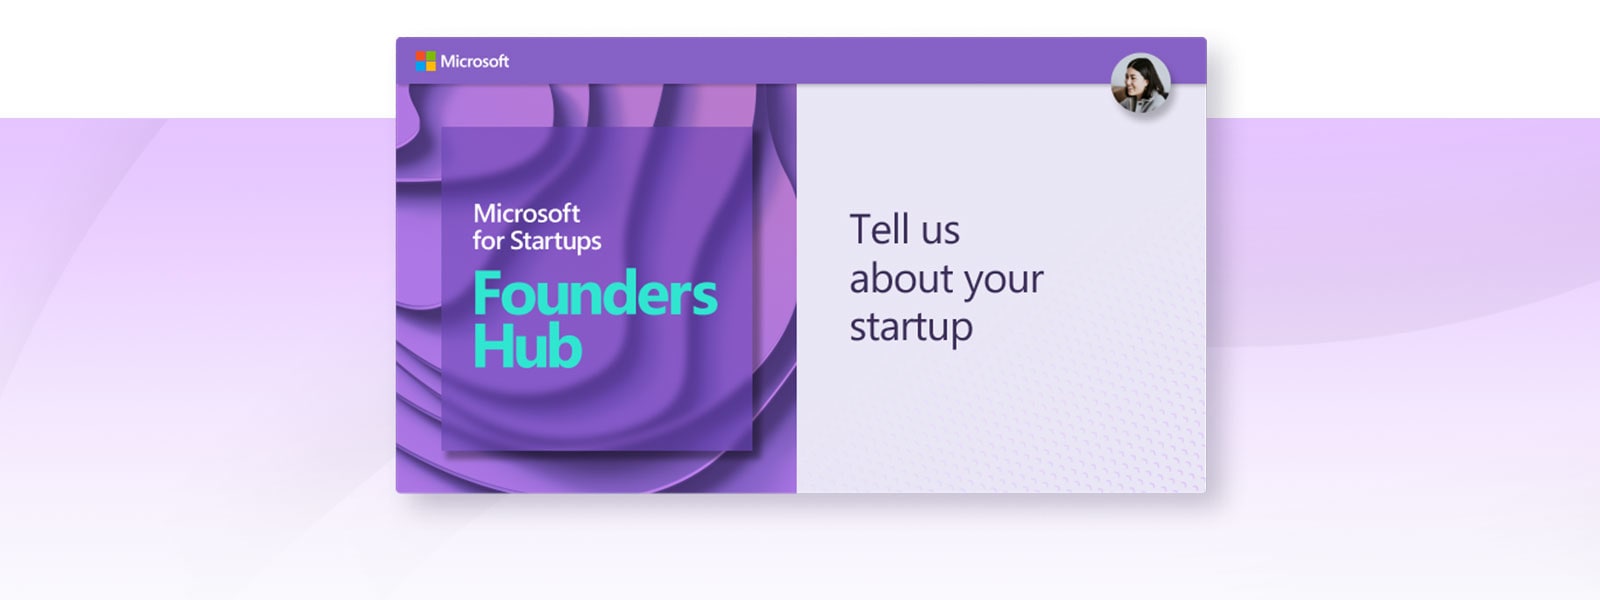 Microsoft for Startups Founders Hub (Open to anyone) – Call for Applications￼